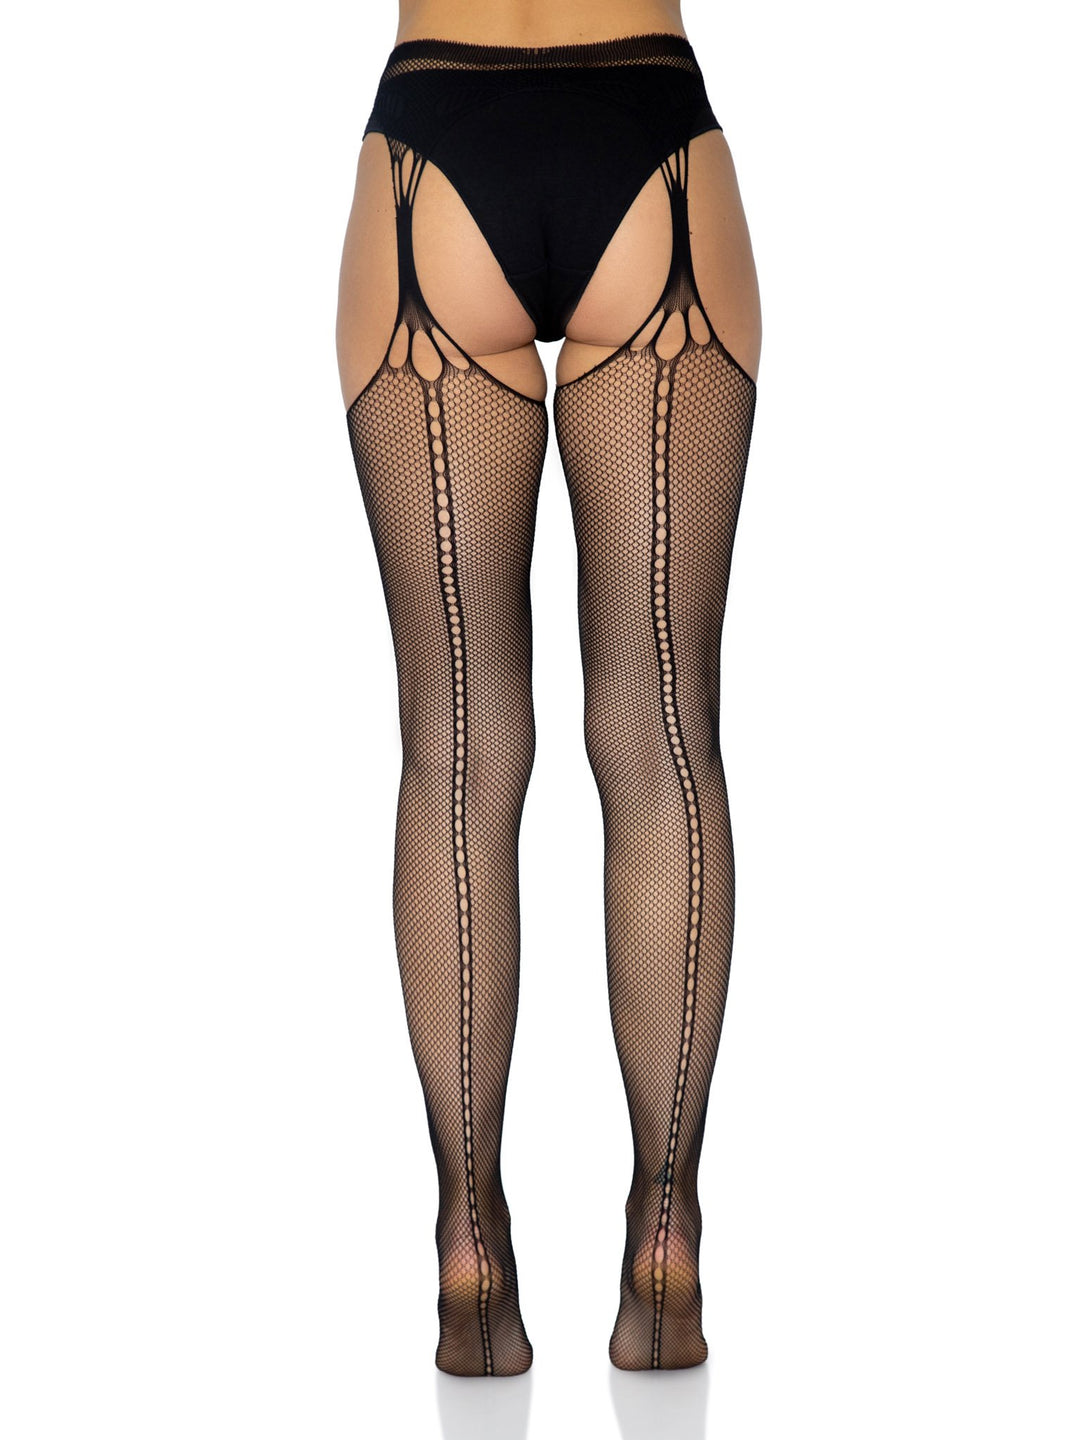 Fishnet Suspender Stockings with Cut-Out Scale Detail